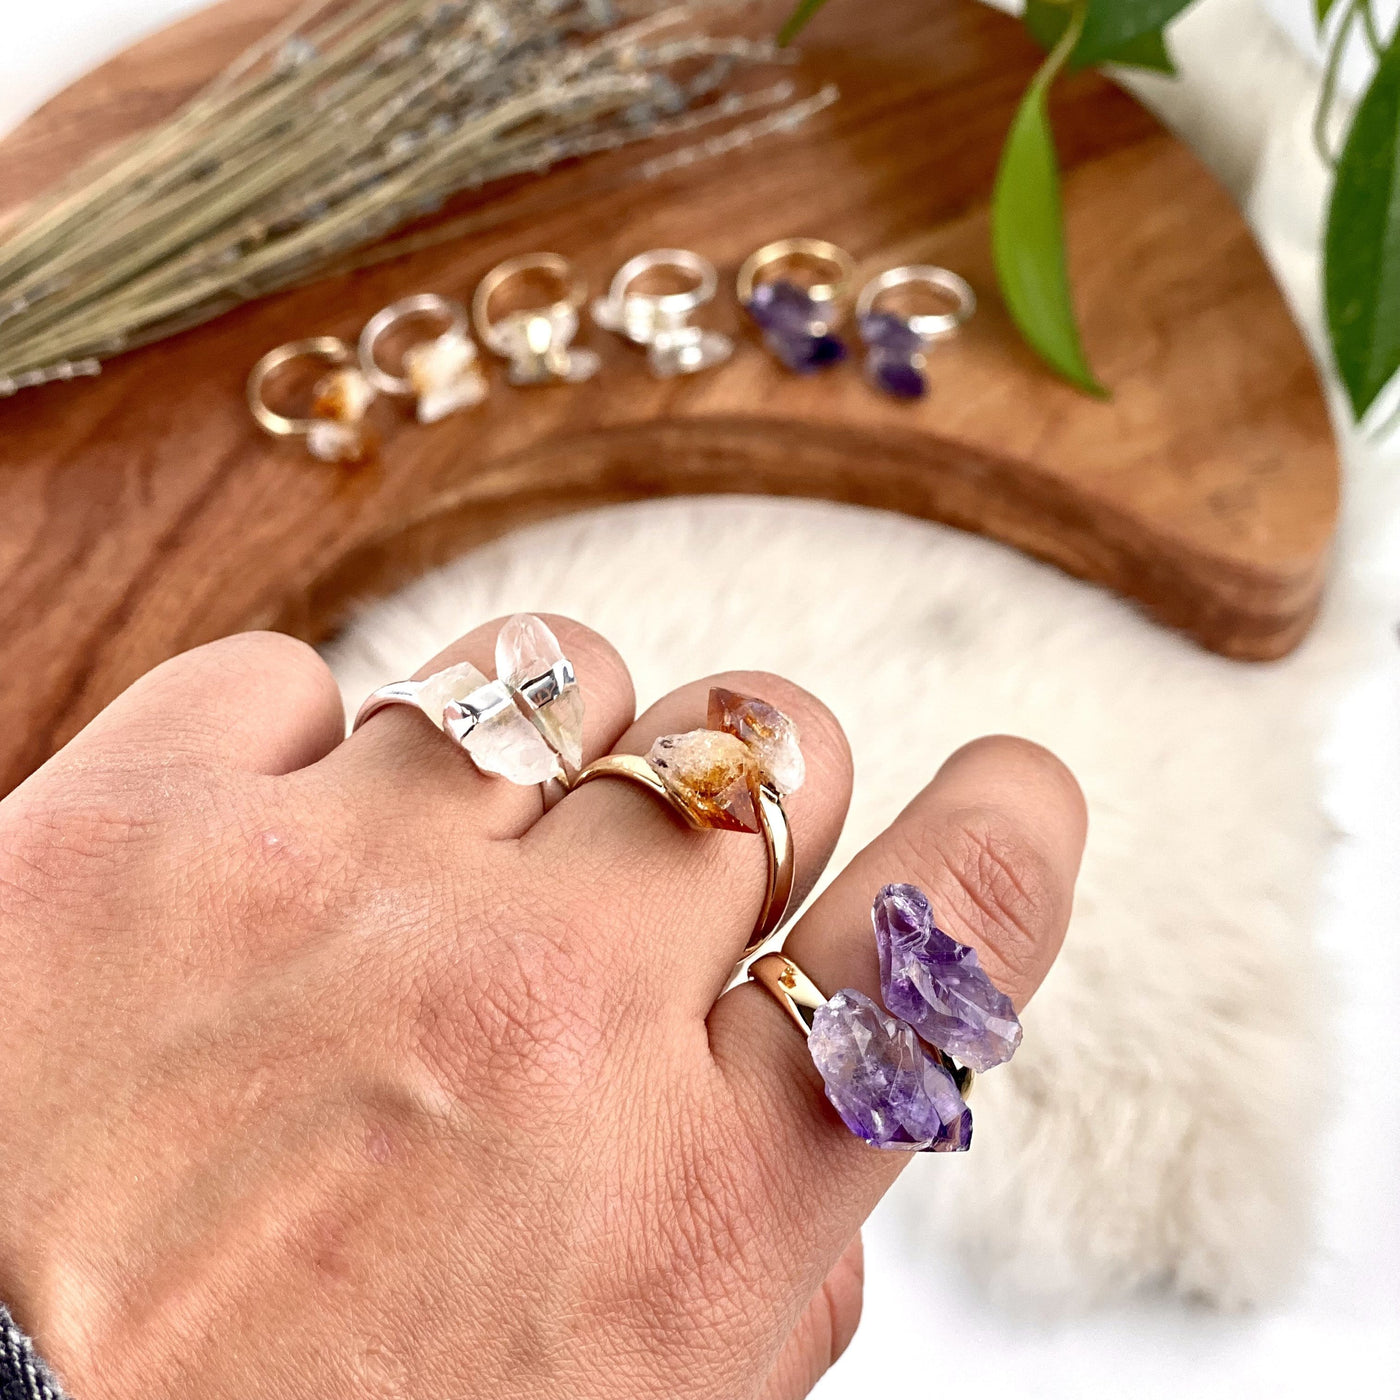 Crystal Quartz, Amethyst, and Citrine Double Point Ring Silver or 24k Gold Electroplated on hand for size comparison 